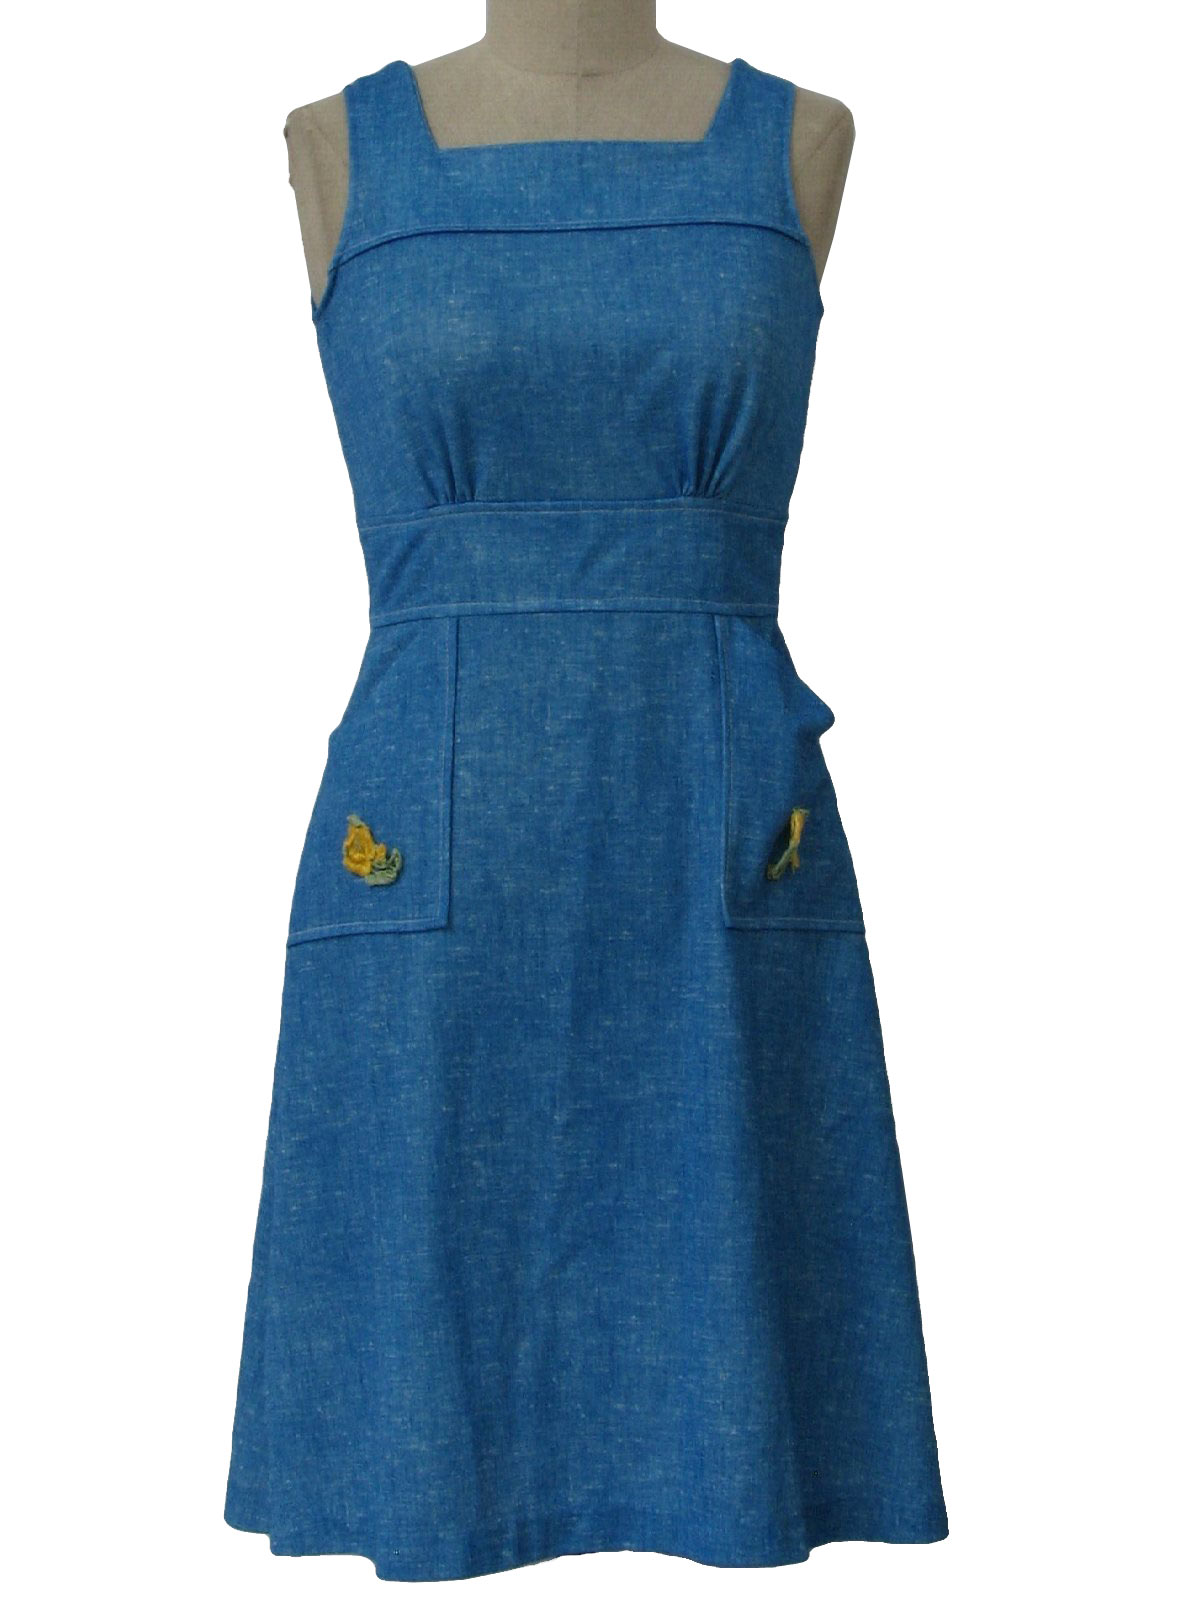 sears mod knit jumper dress 70s sears womens blended blue and white ...